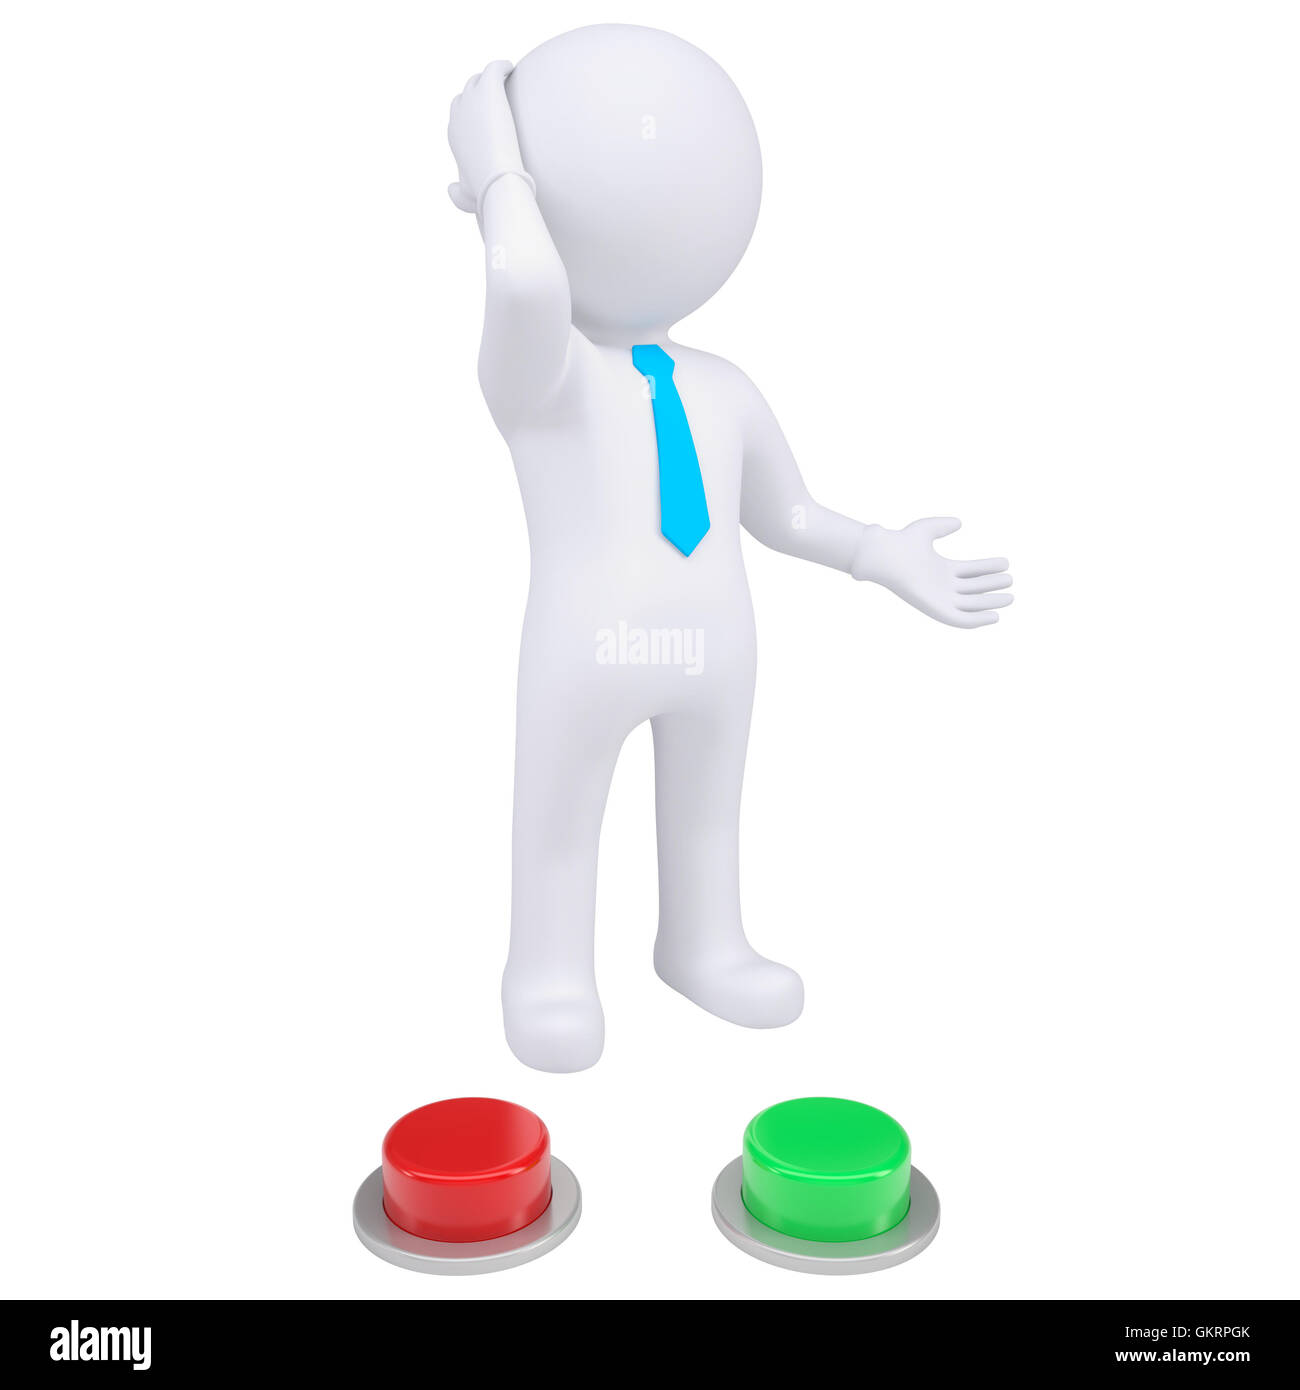 3d man standing near the red and green buttons Stock Photo - Alamy